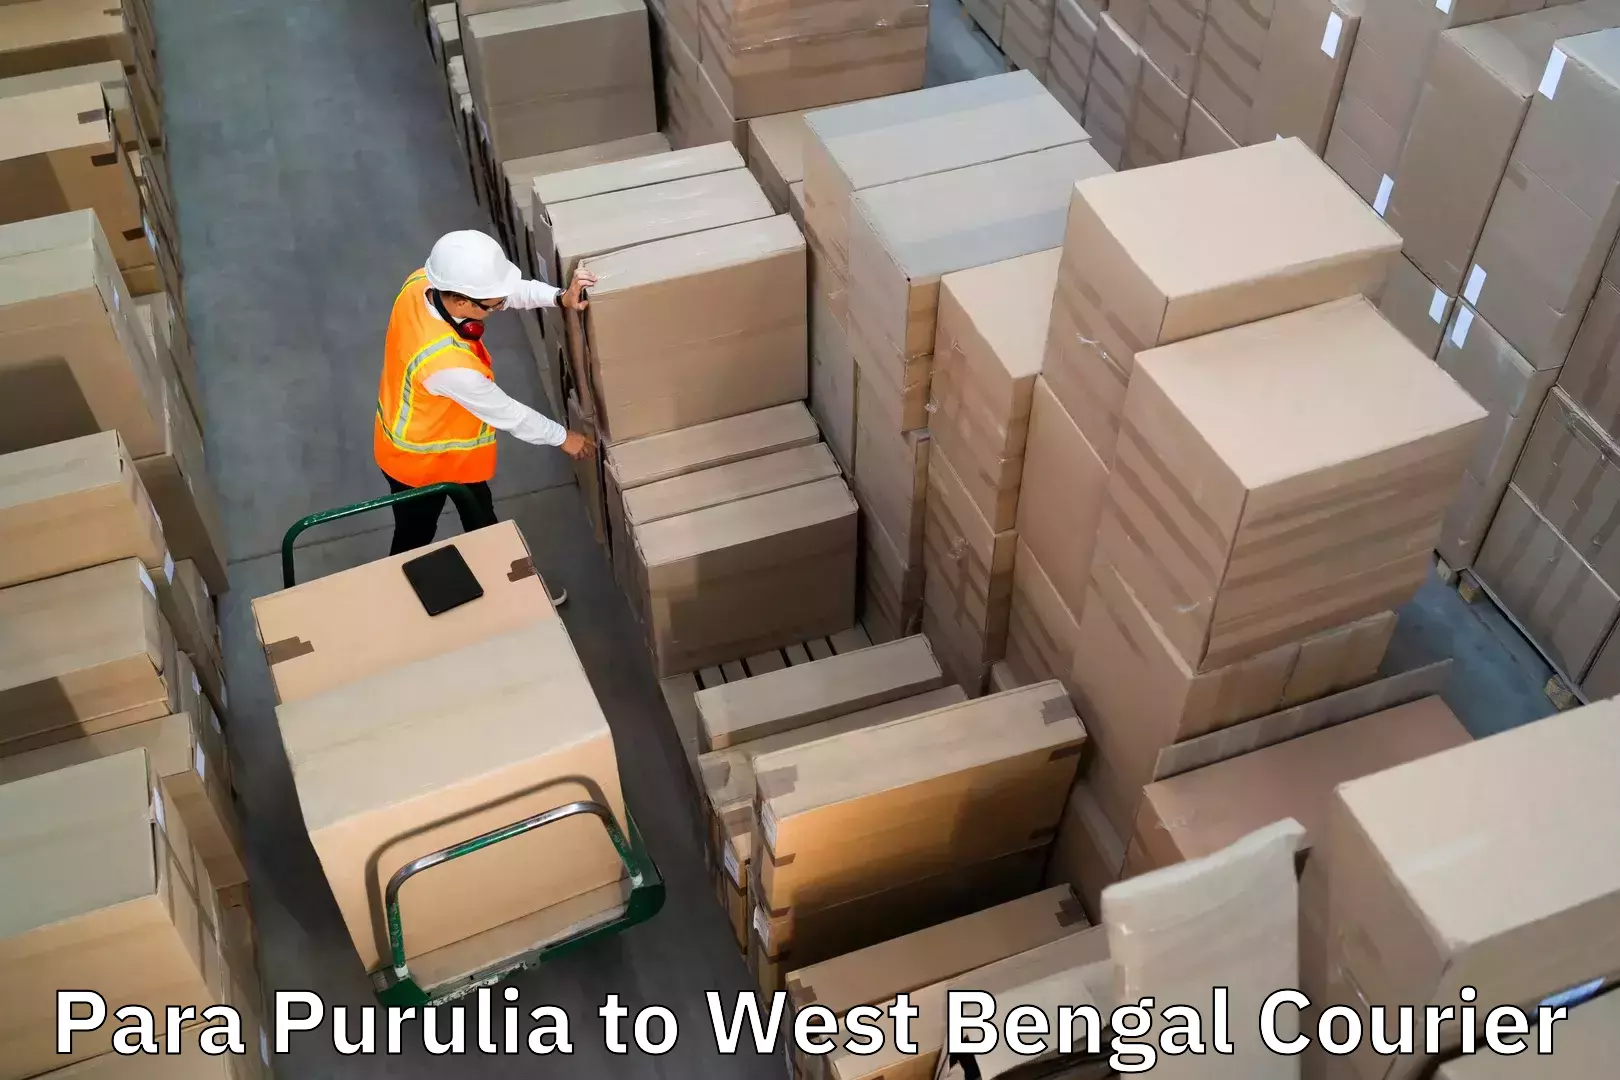 Luggage delivery network Para Purulia to Simlapal